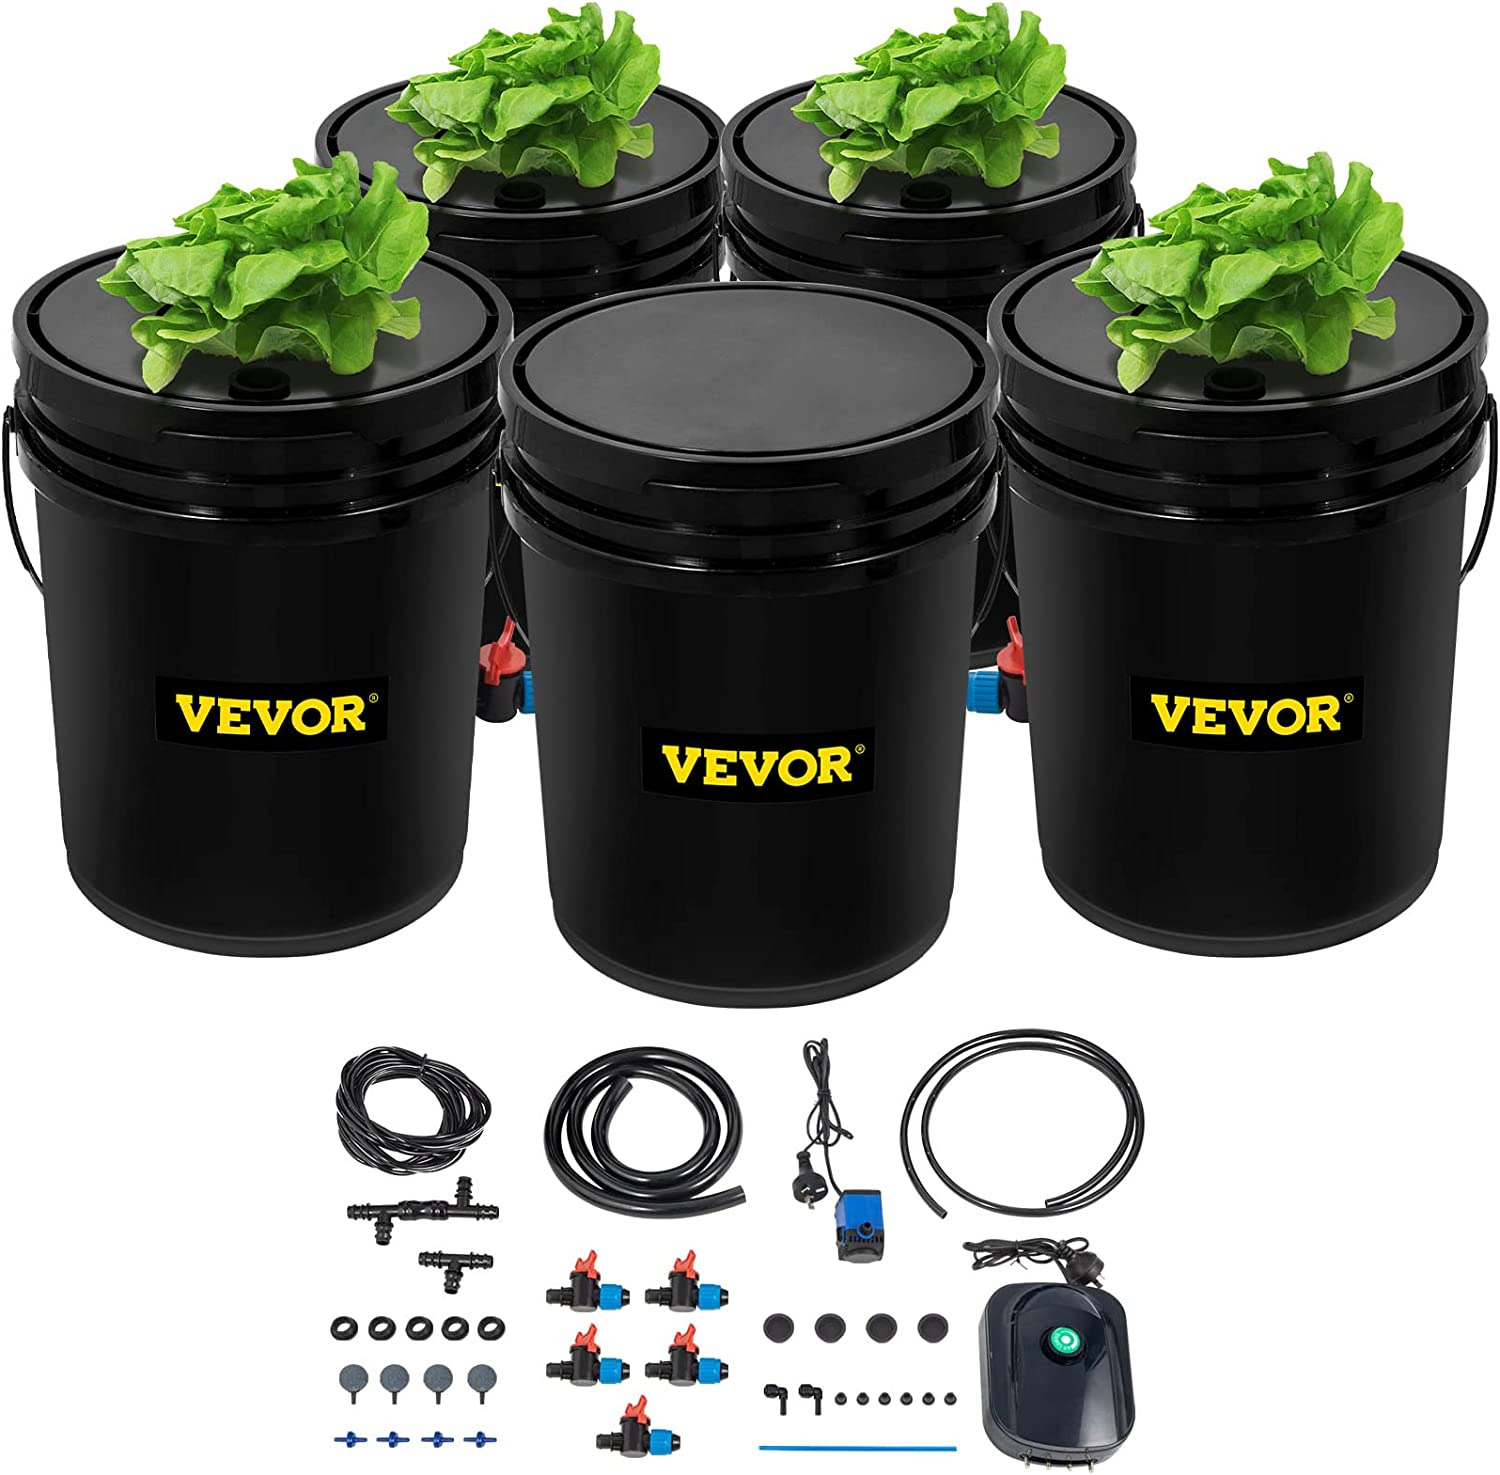 Hydroponic System for Indoor/Outdoor Leafy Vegetables - 5 Gallon, Black